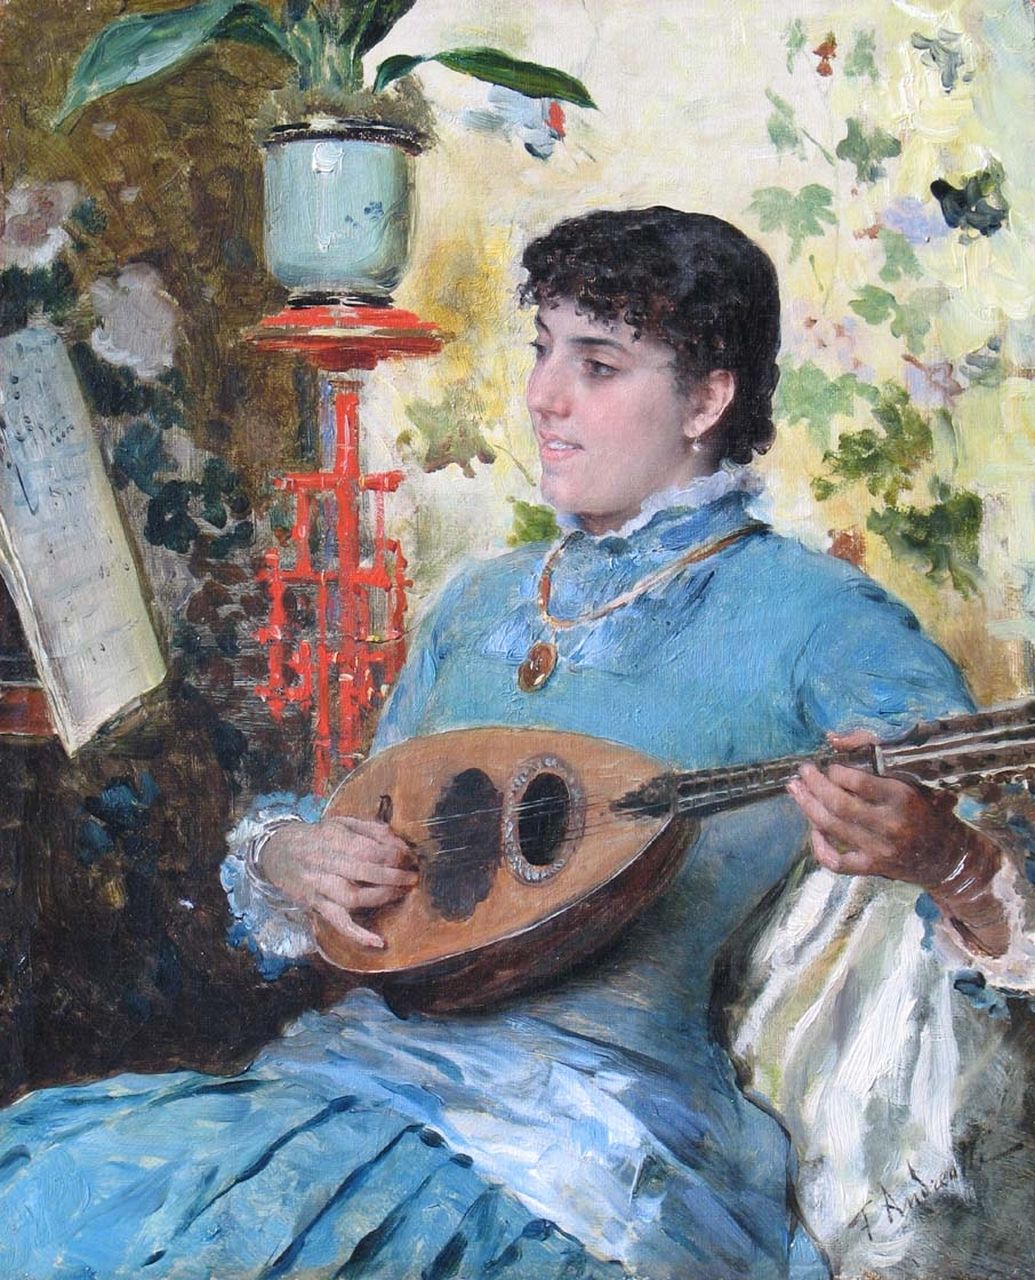 Andreotti F.  | Federigo Andreotti, The lute-player, oil on canvas 31.1 x 25.6 cm, signed l.r.